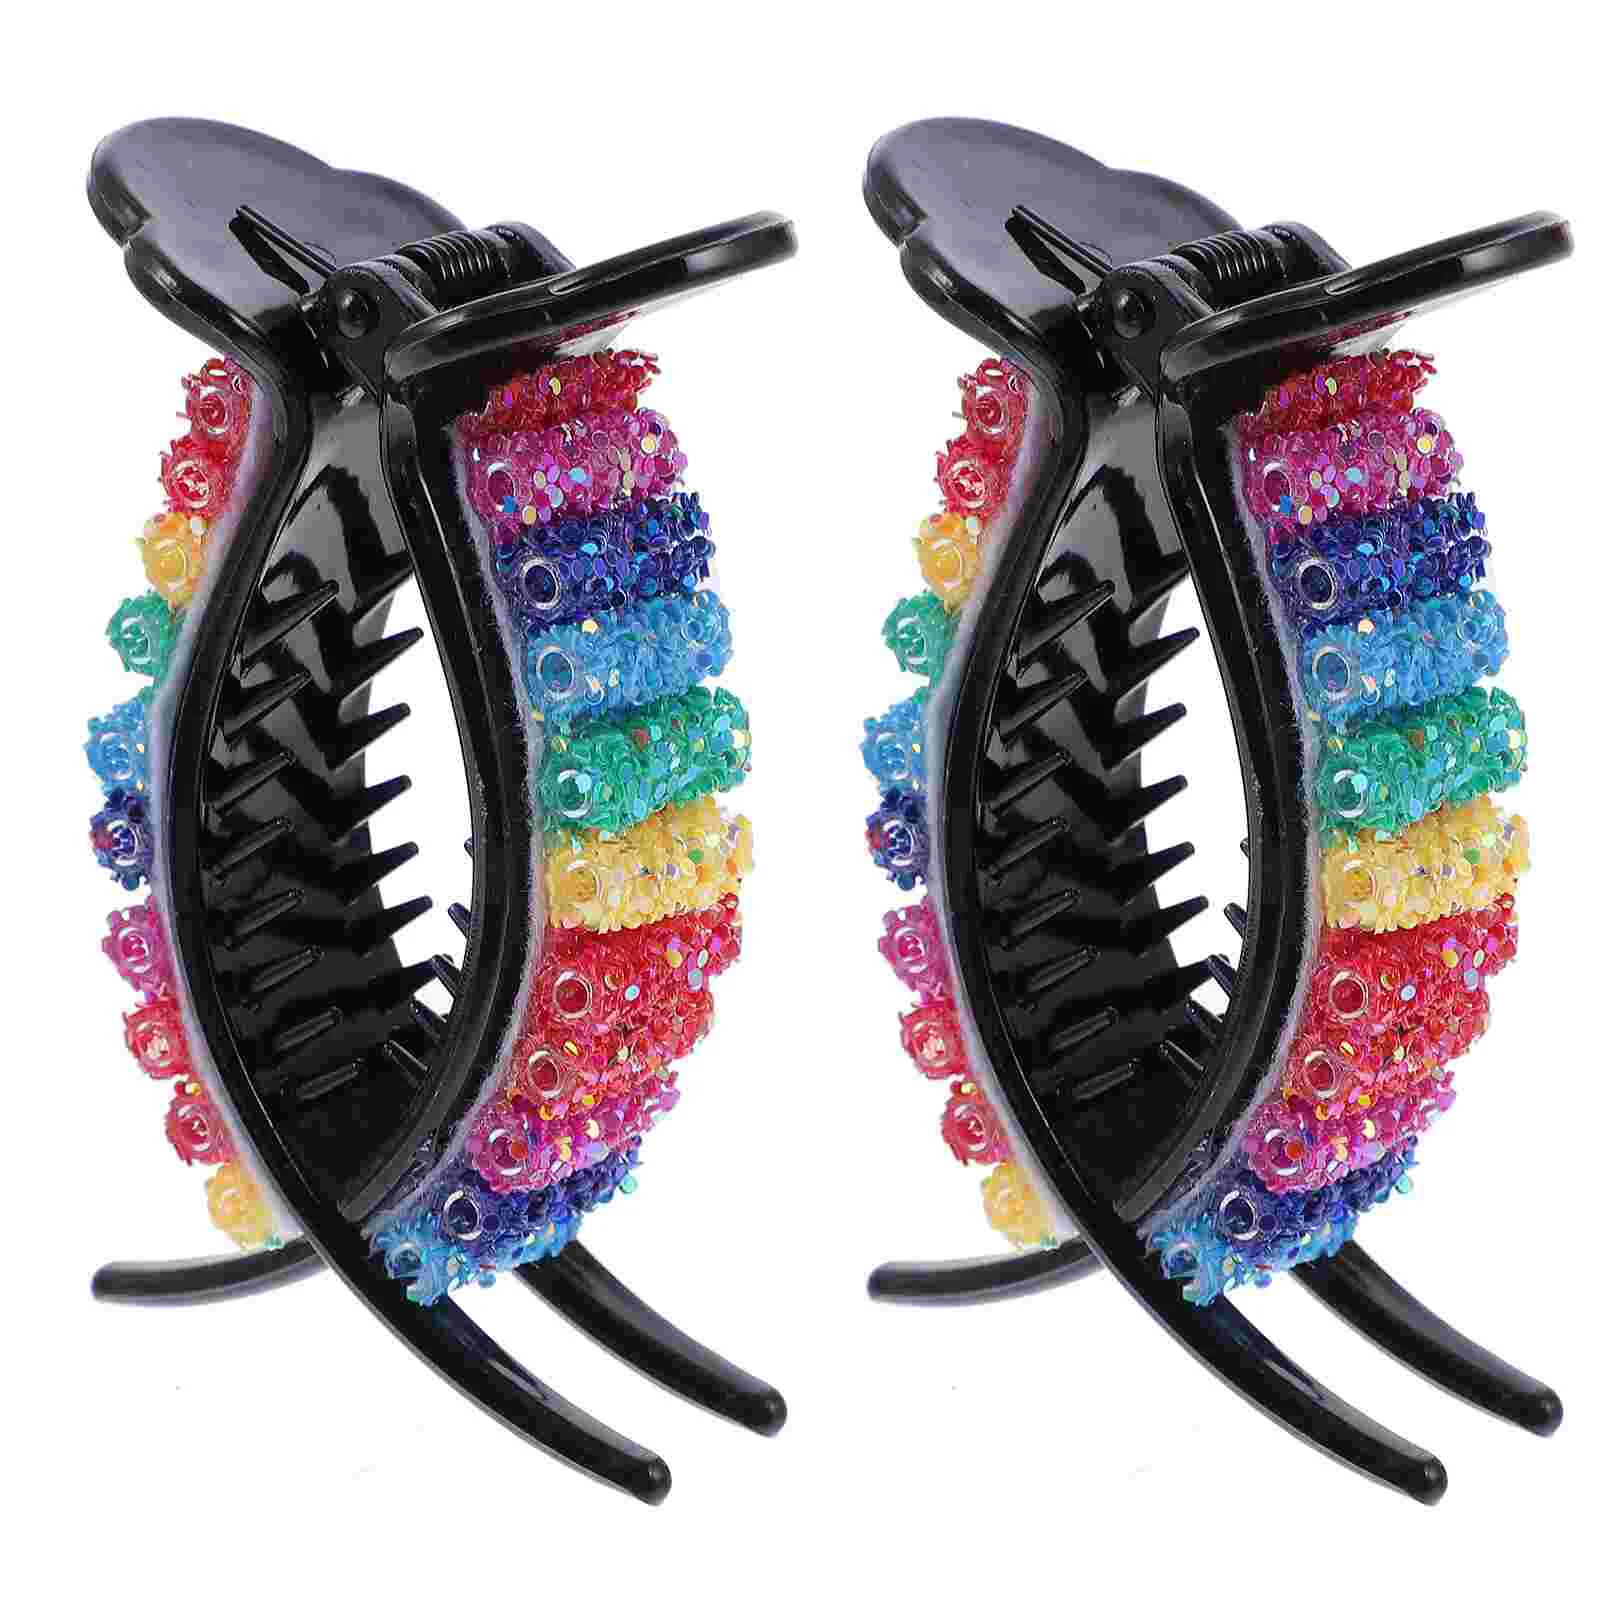 

2 Pcs Hair Dryer Colorful Female Clamp Decorative Clips Giant Strong Hold Barrette Jaw Claw Resin Barrettes Vintage